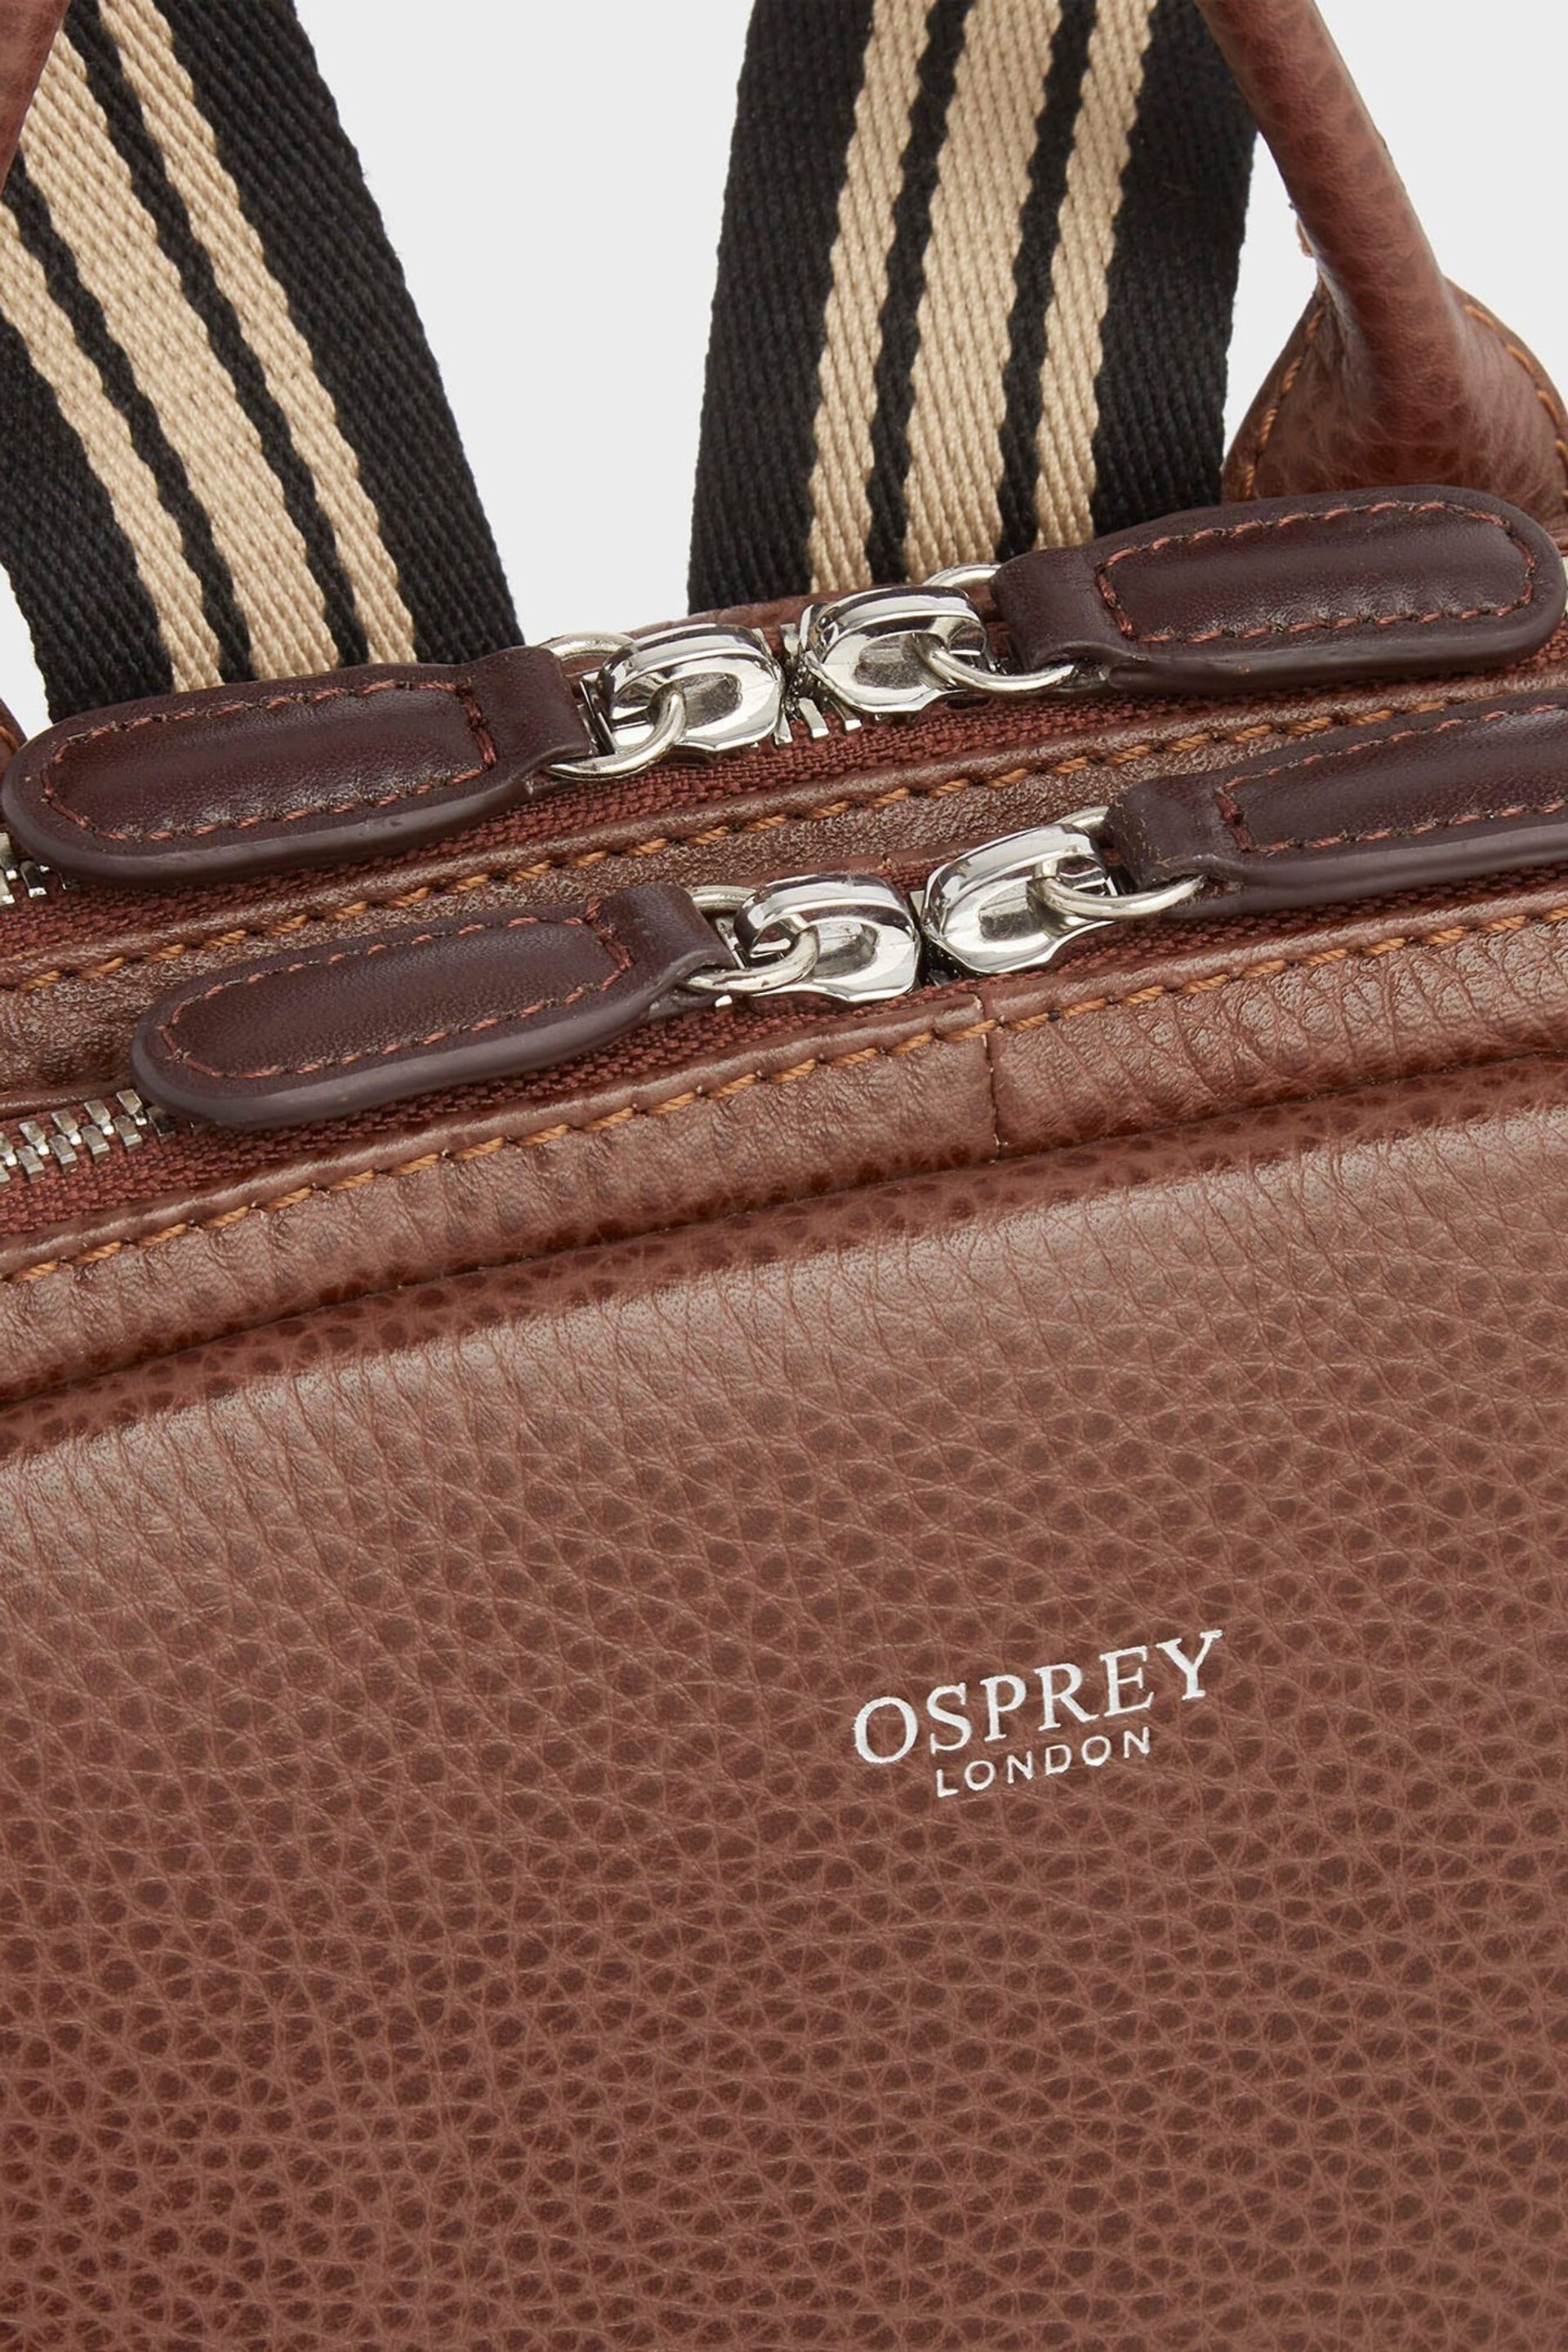 Osprey London The Chiswick Leather Backpack - Image 5 of 5